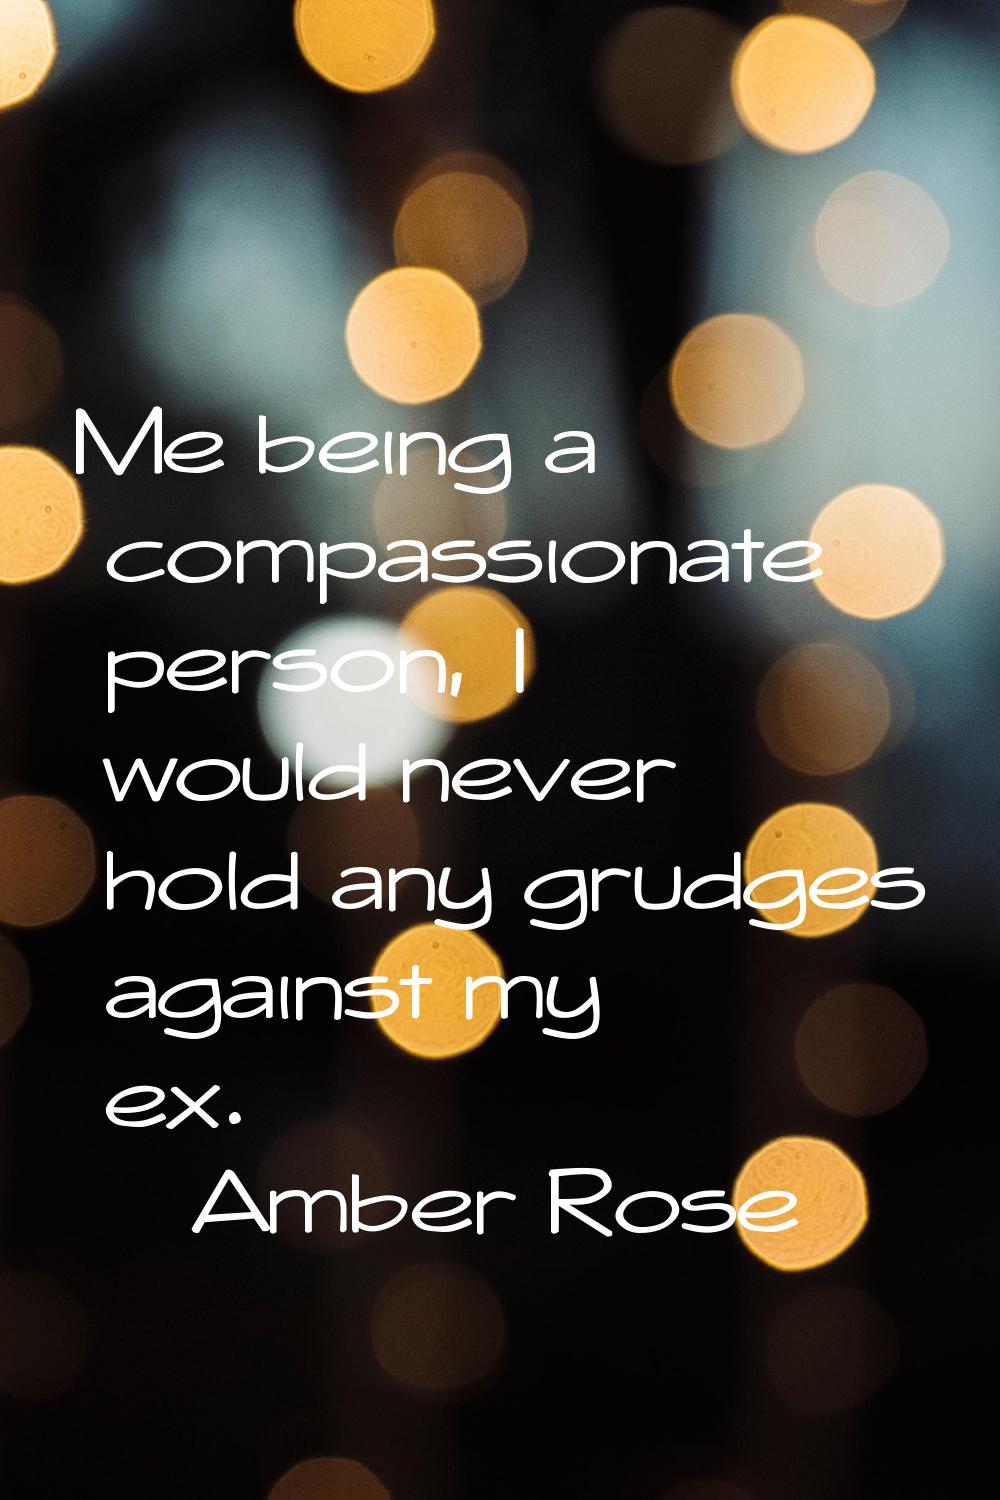 Me being a compassionate person, I would never hold any grudges against my ex.